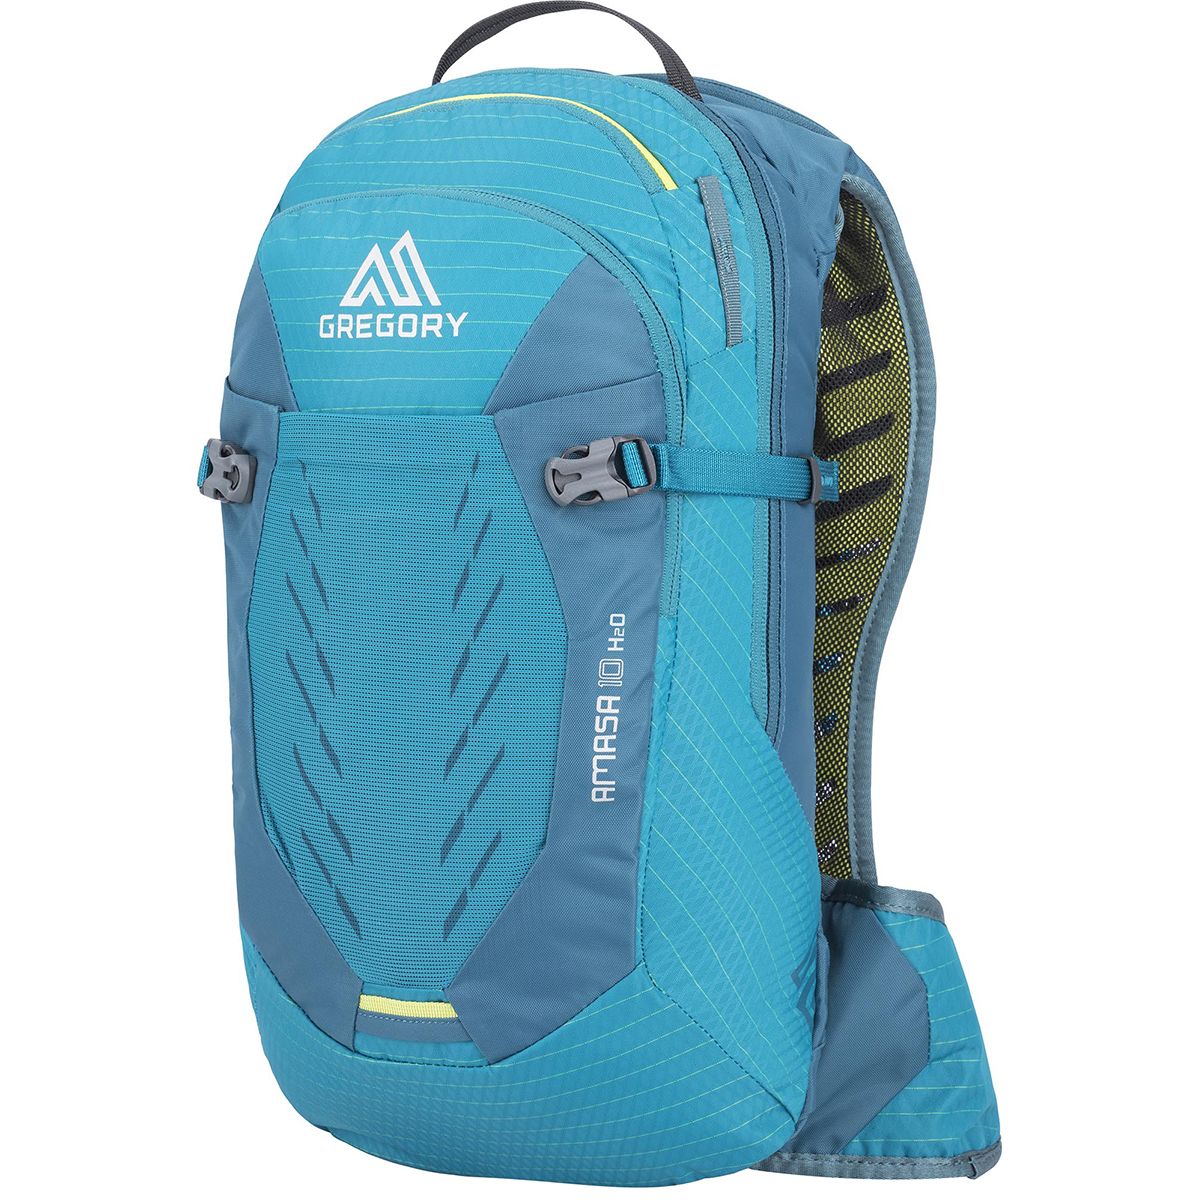 Gregory Amasa 10L Backpack - Women's Meridian Teal, One Size